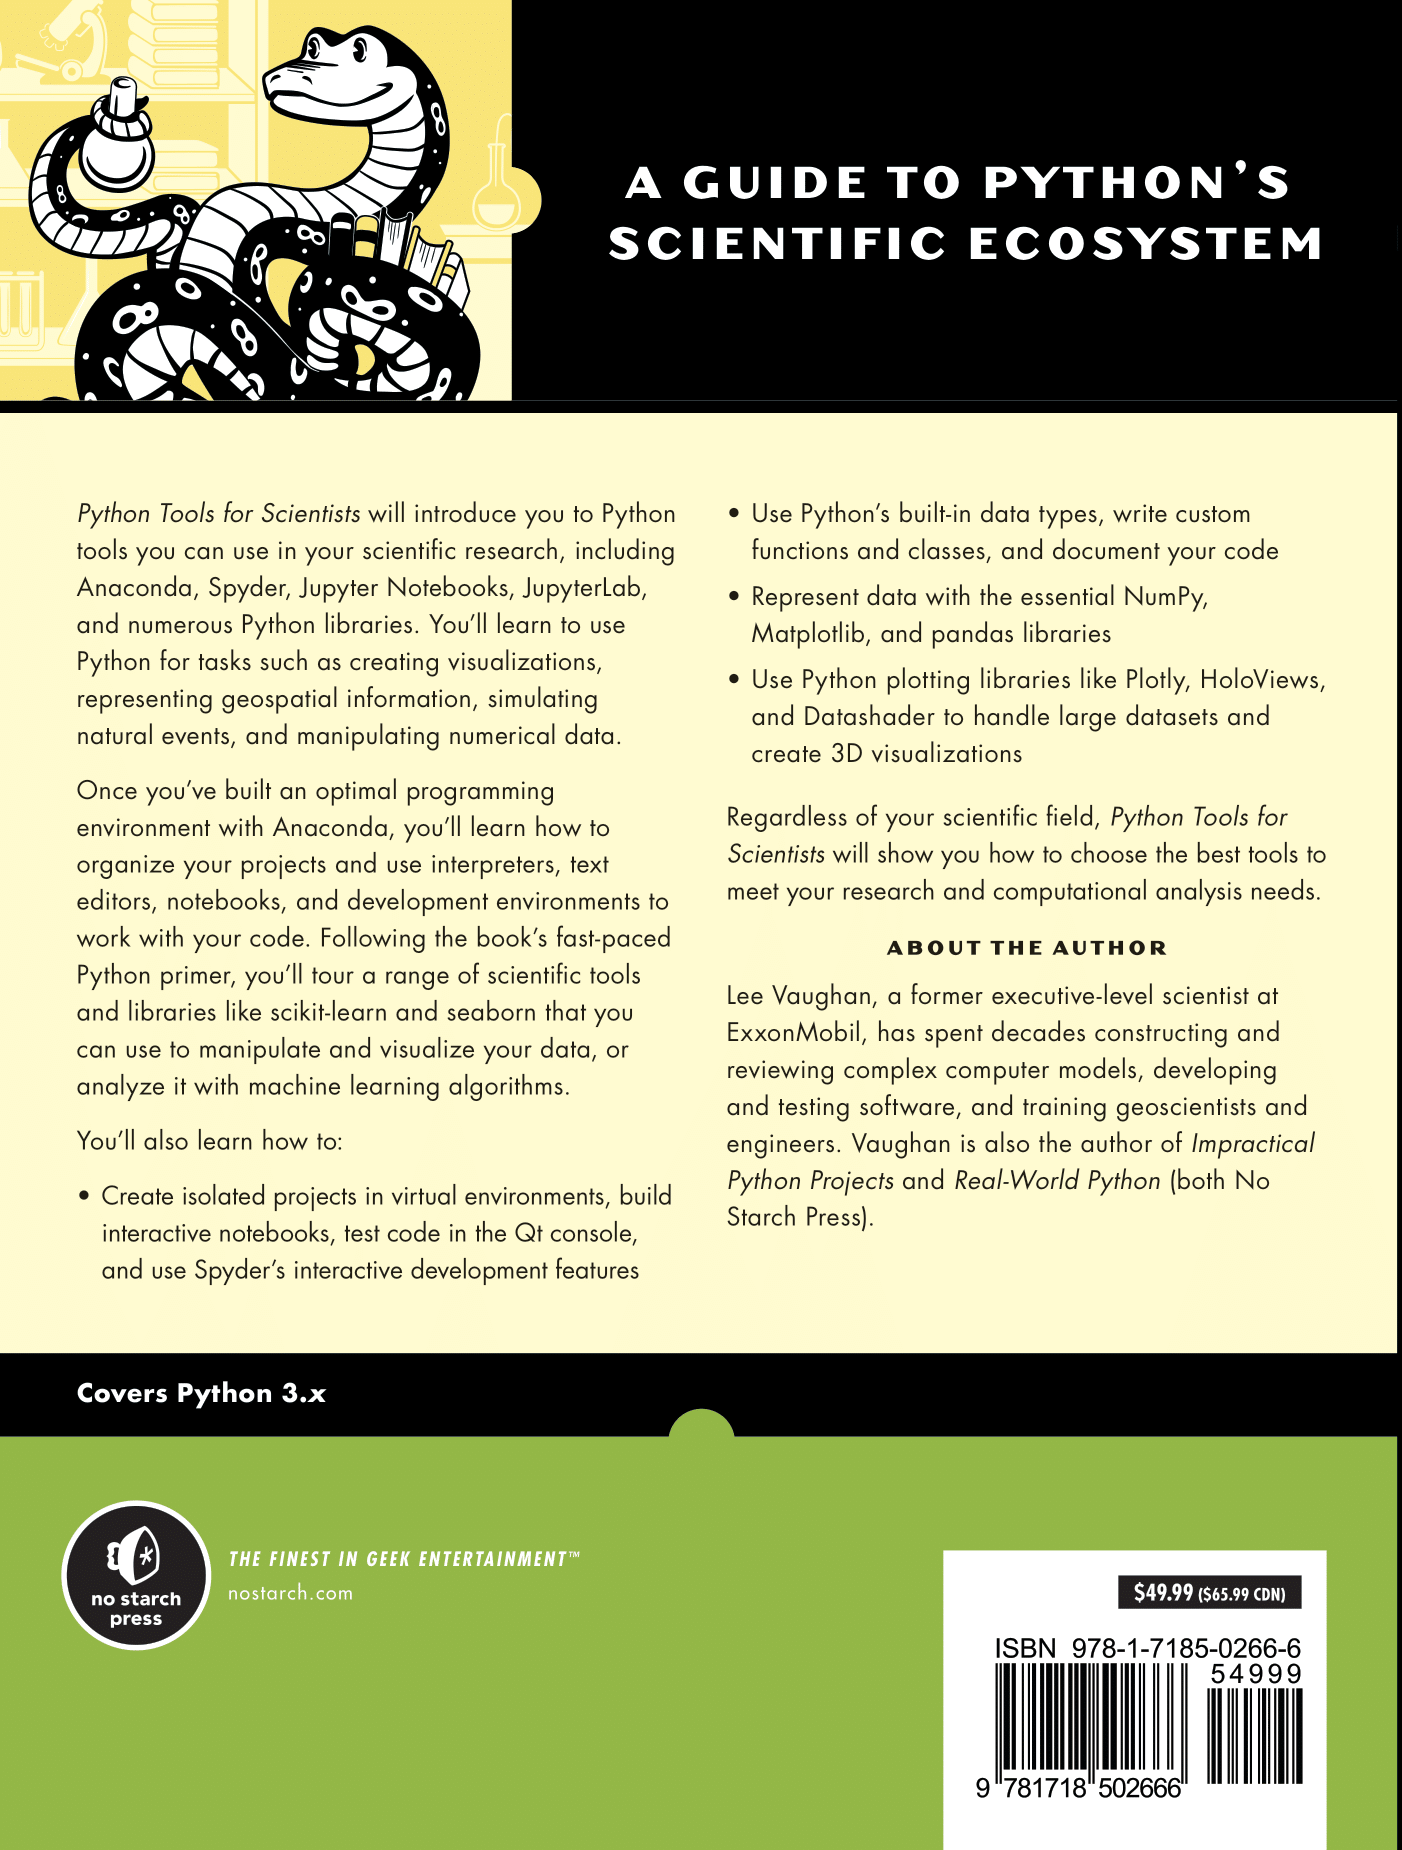 Python Tools for Scientists back cover